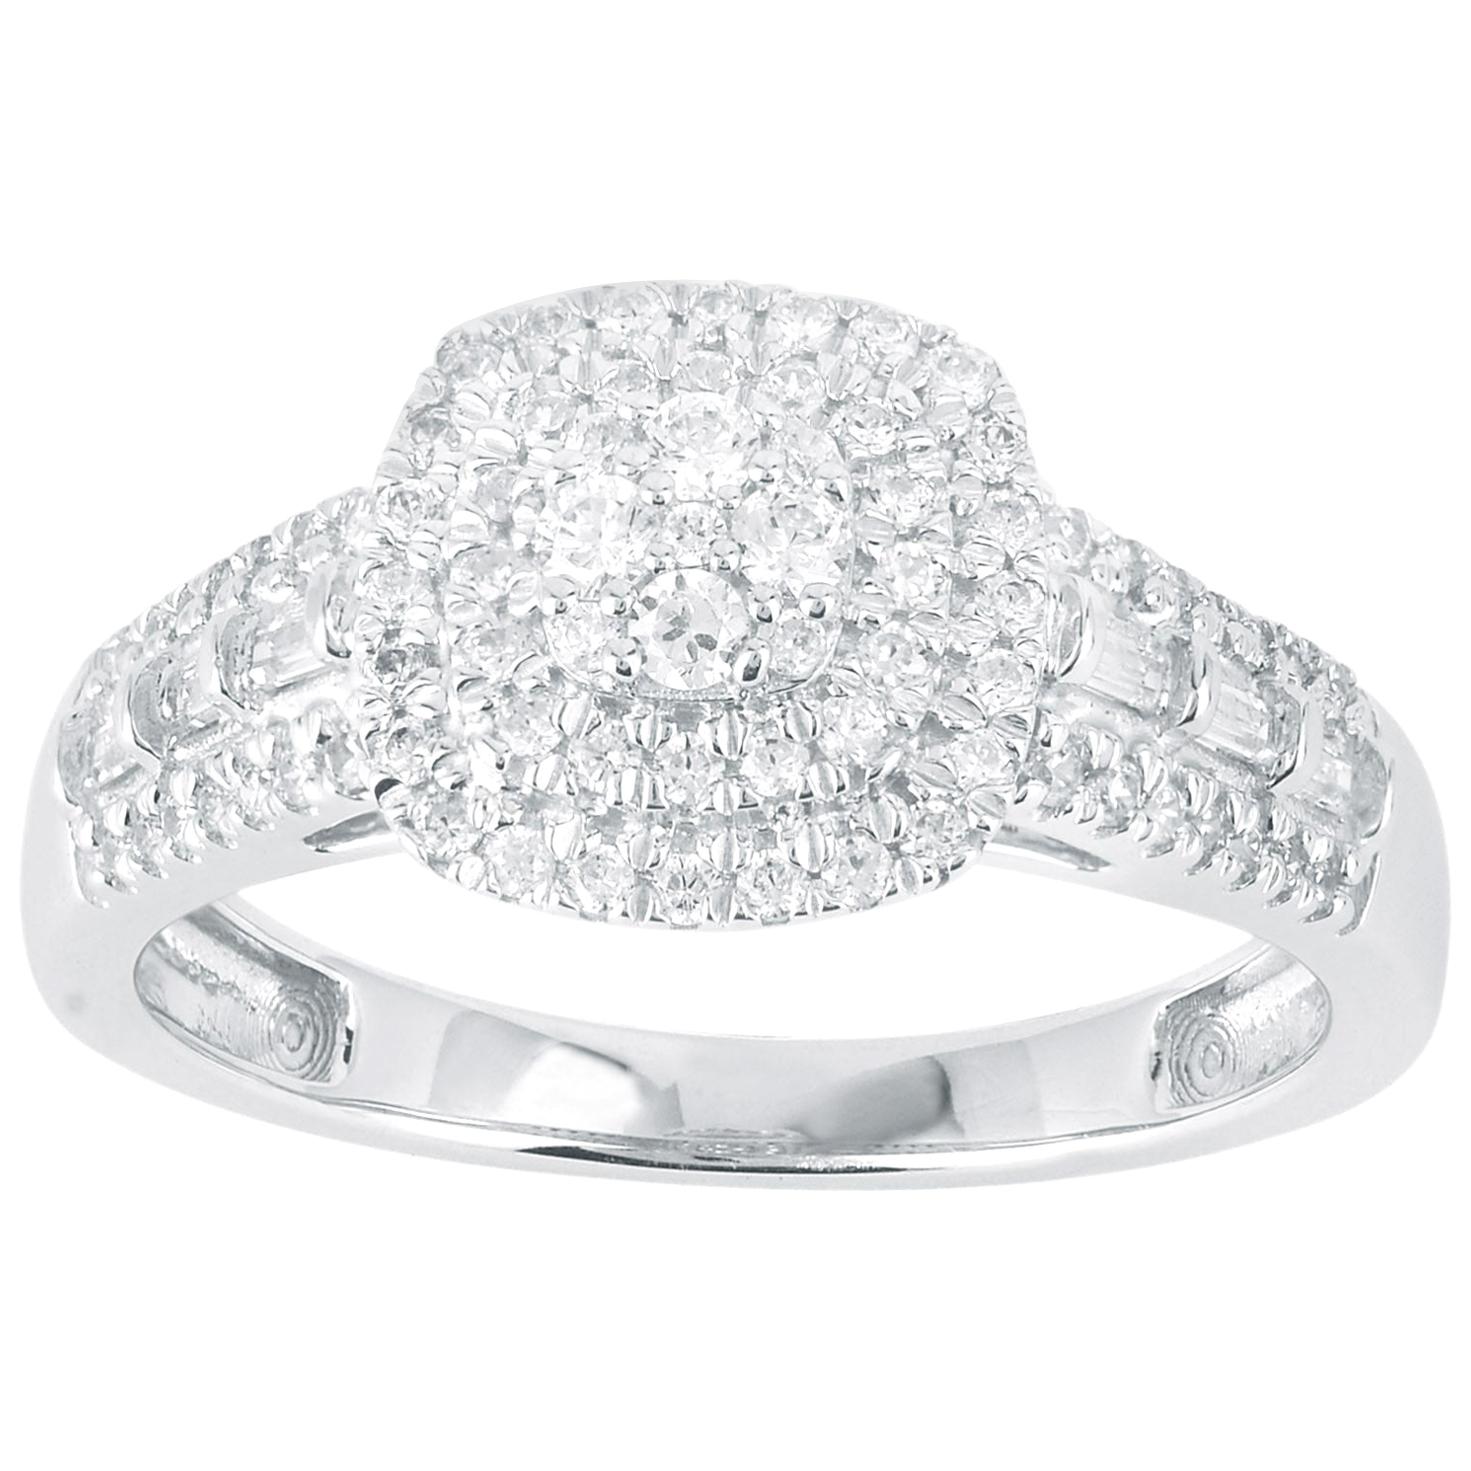 TJD 1/2 Carat Round and Baguette Diamond 14K White Gold Cluster Engagement Ring